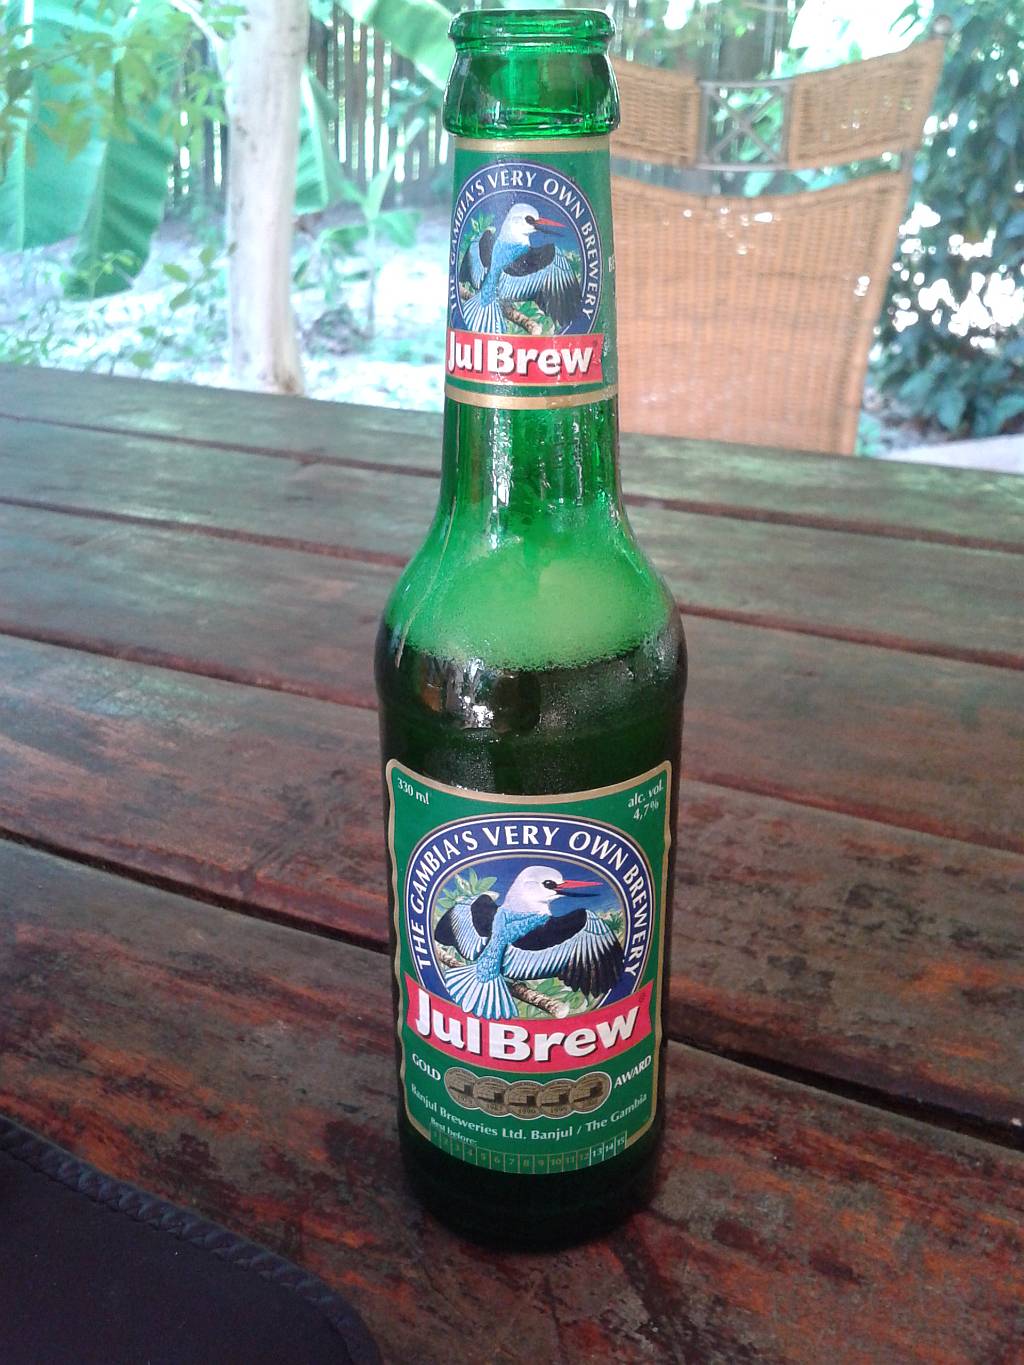 Julbrew beer, The Gambia